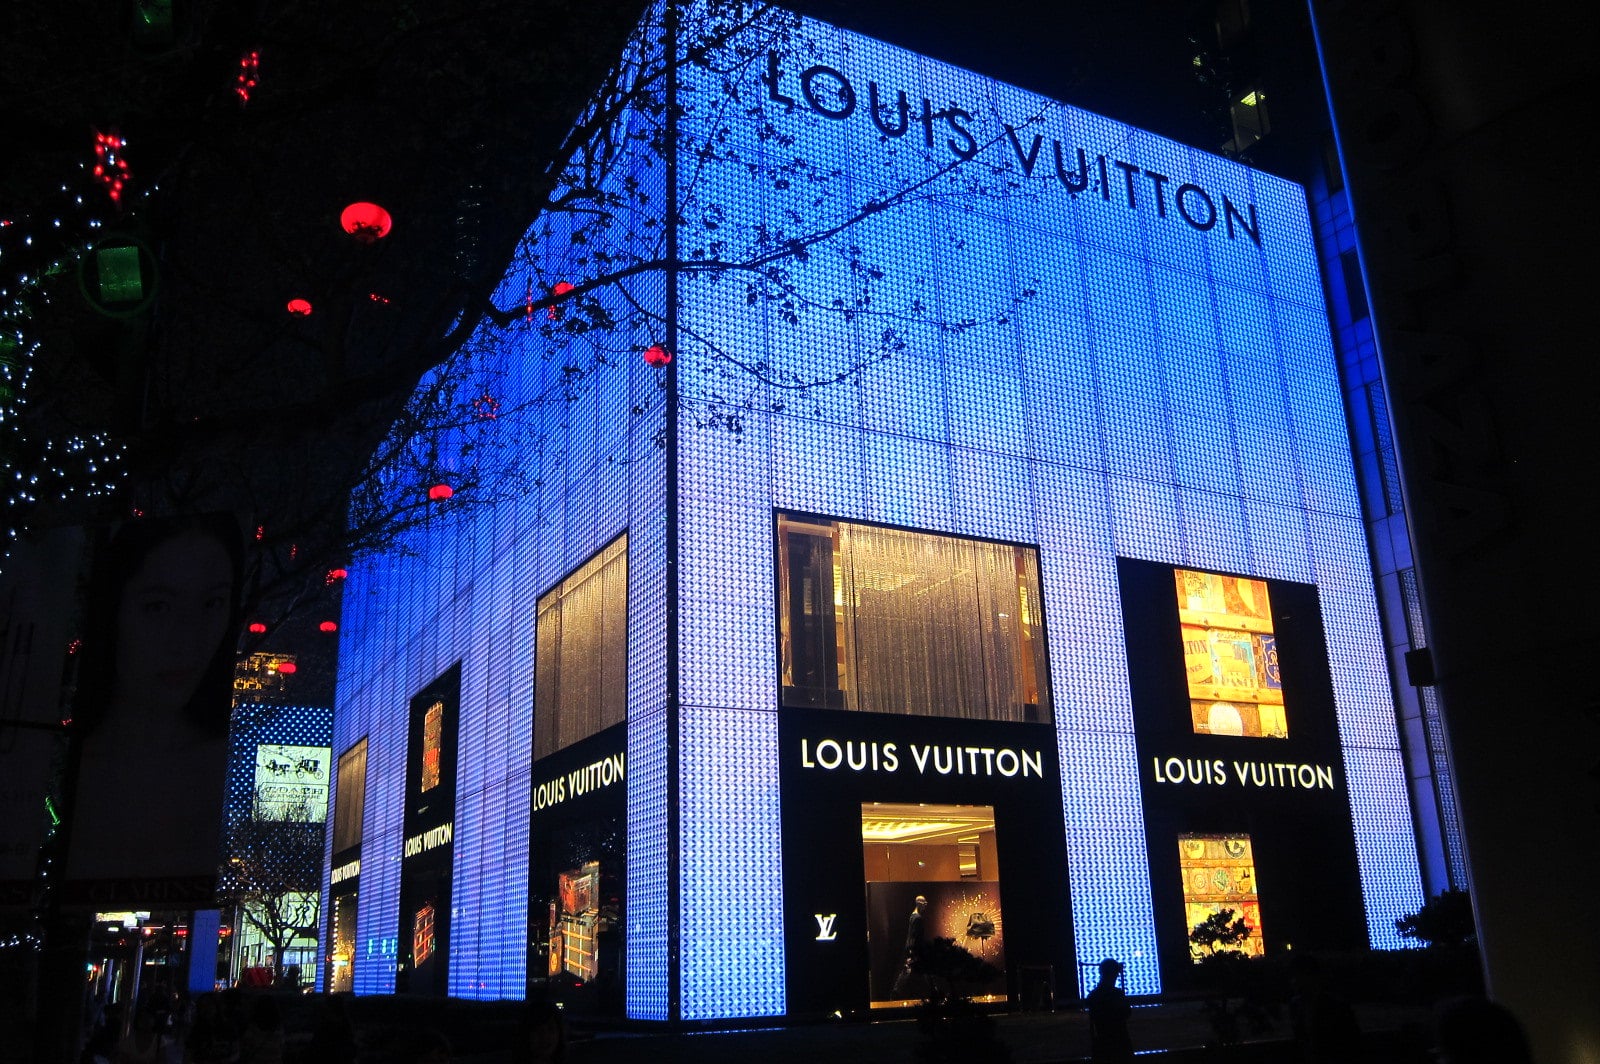 Architectural Glass Design for Louis Vuitton, Beijing China